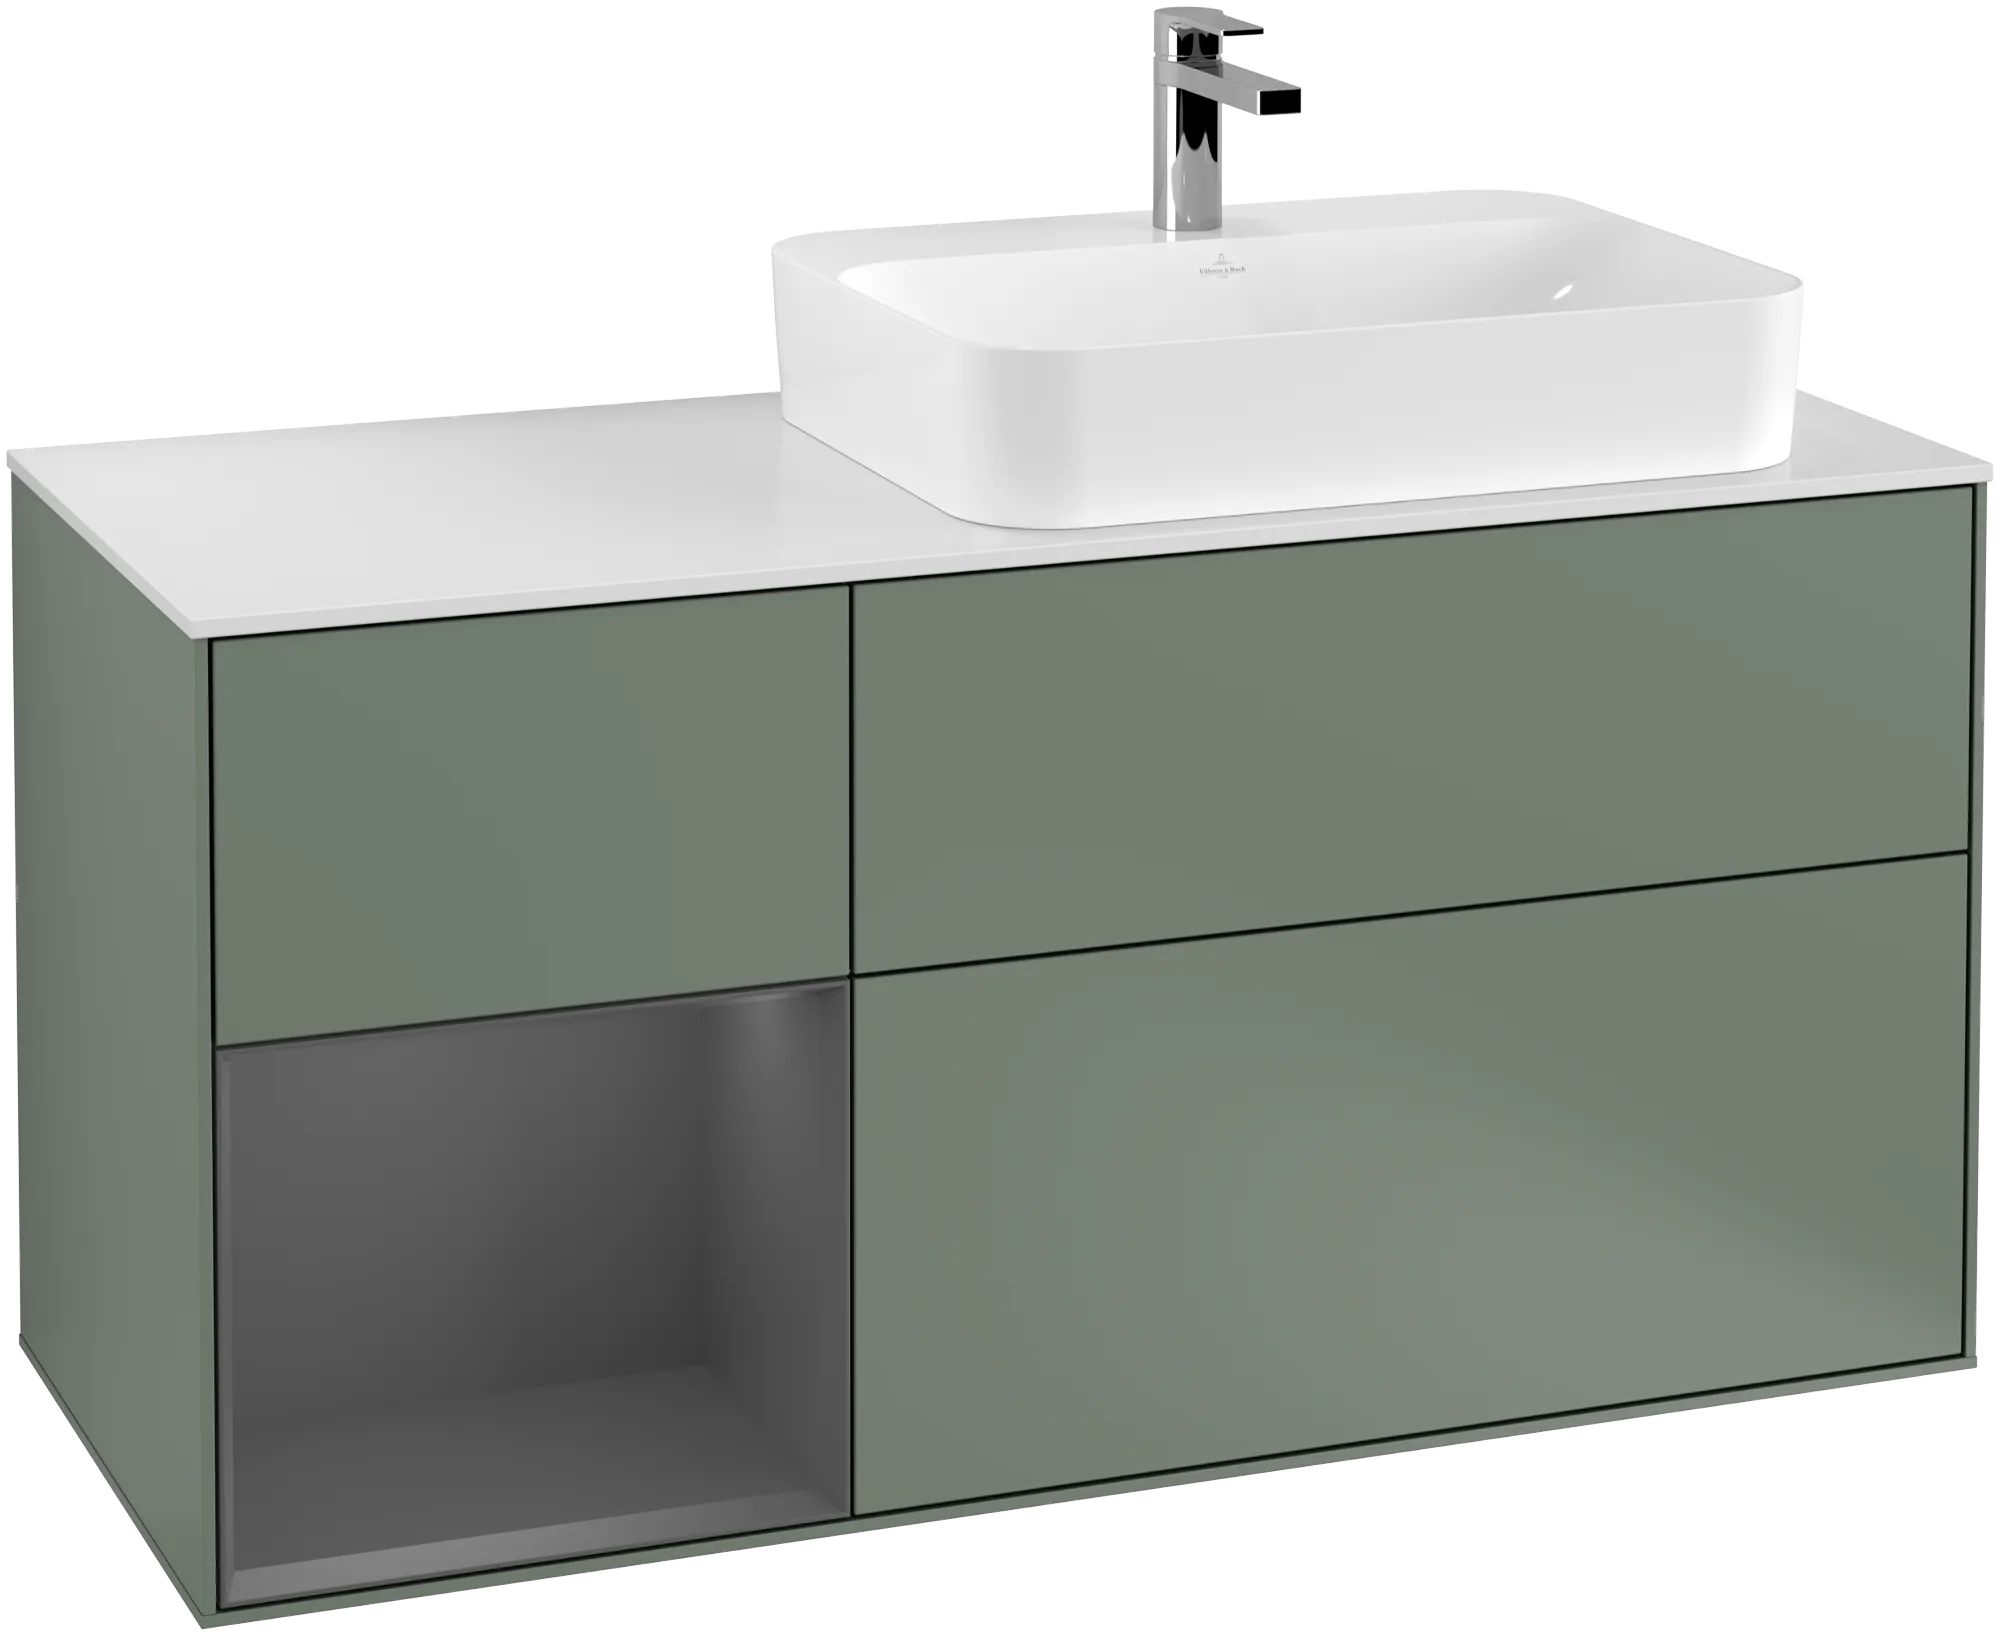 Obrázek VILLEROY BOCH Finion Vanity unit, with lighting, 3 pull-out compartments, 1200 x 603 x 501 mm, Olive Matt Lacquer / Anthracite Matt Lacquer / Glass White Matt #G391GKGM